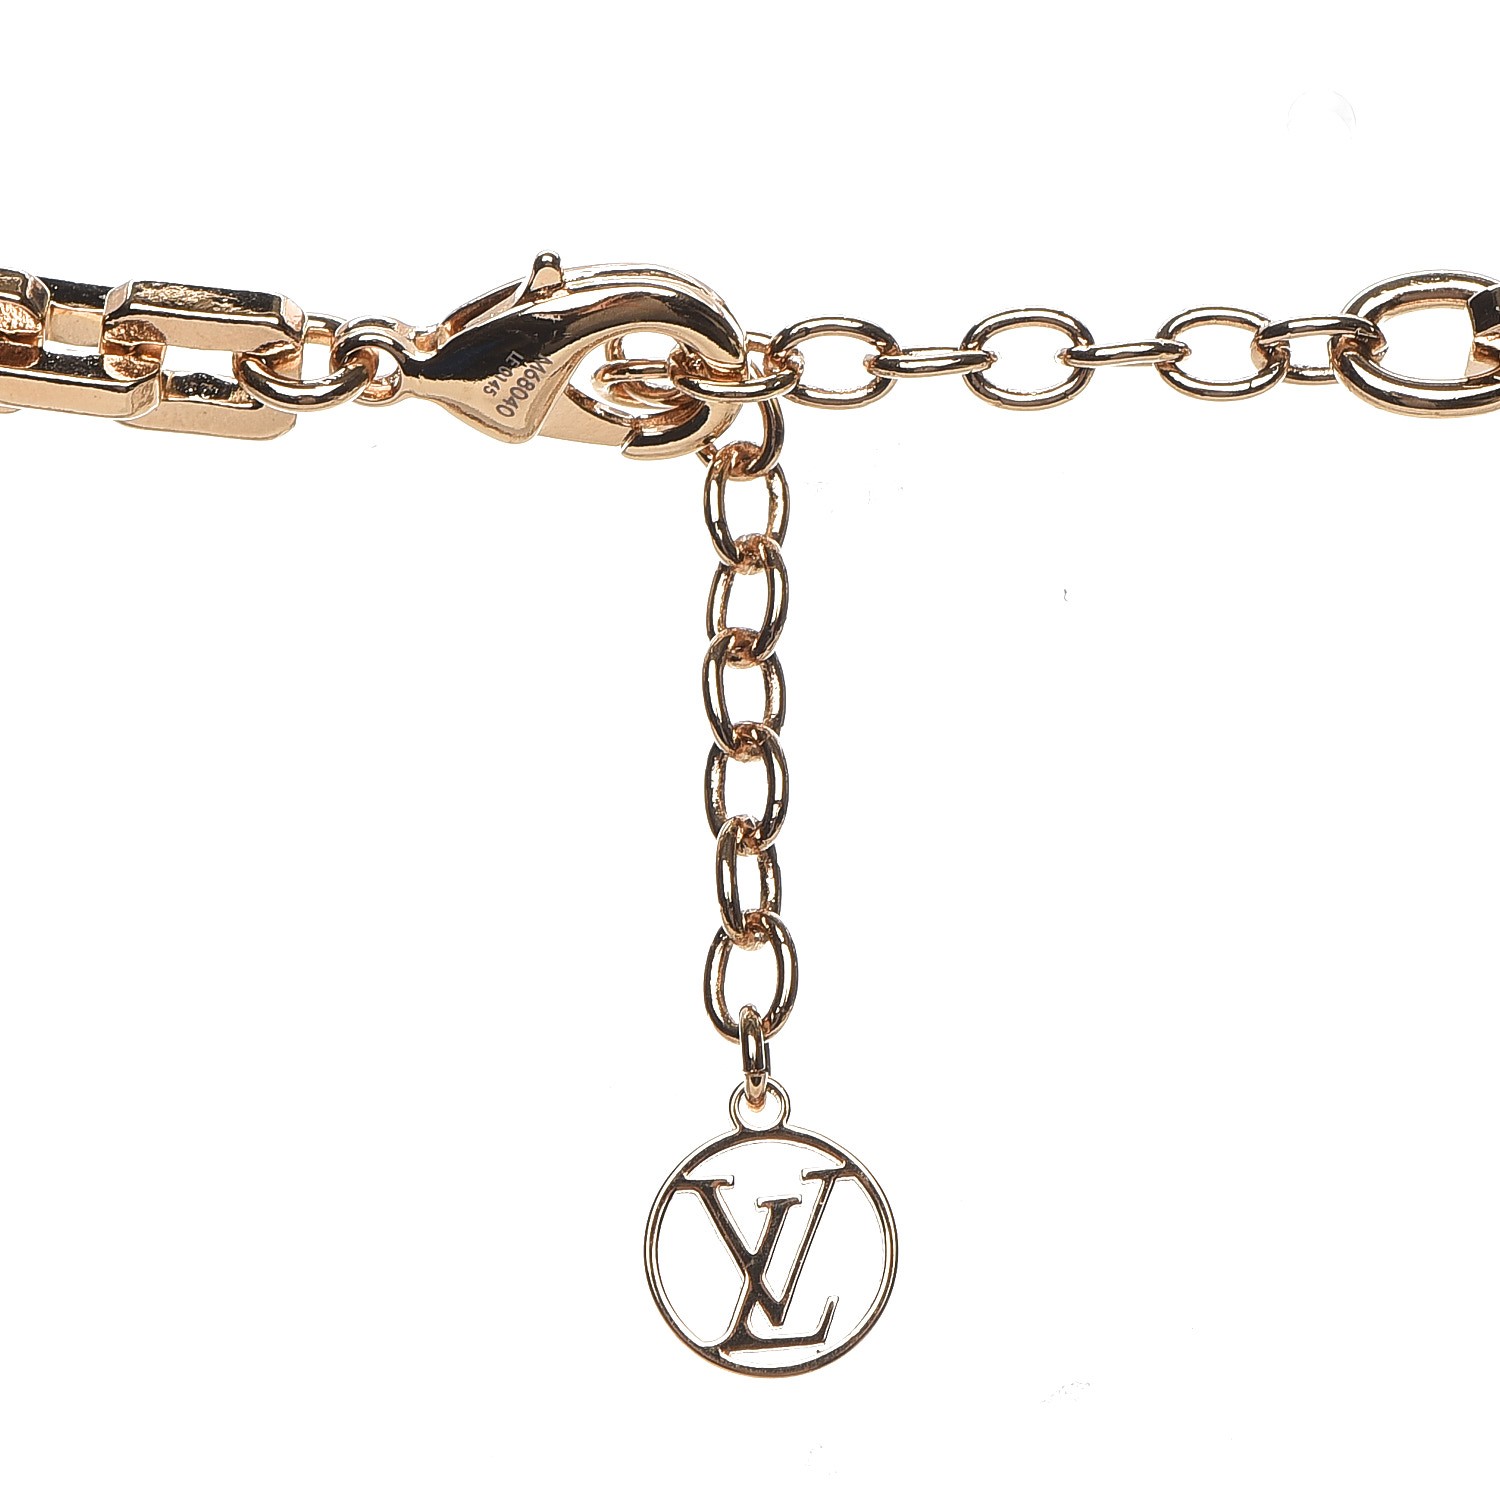 FWRD Renew Louis Vuitton Collier Necklace in Gold